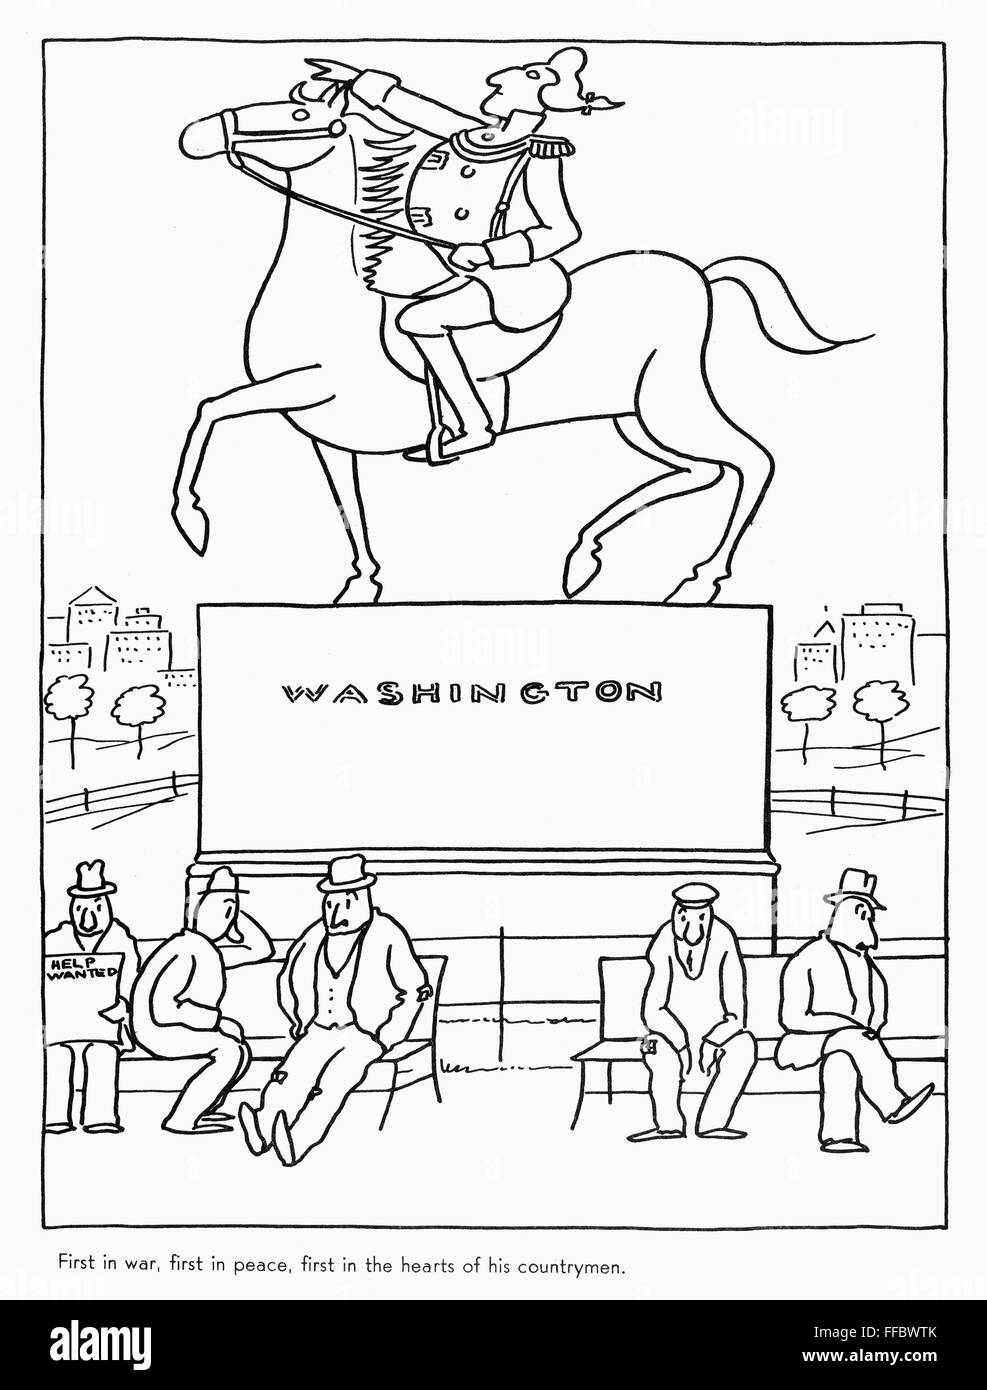 GREAT DEPRESSION CARTOON. /n'First in war, first in peace, first in the hearts of his countrymen. American cartoon on the Great Depression, by Otto Soglow, early 1930s. Stock Photo